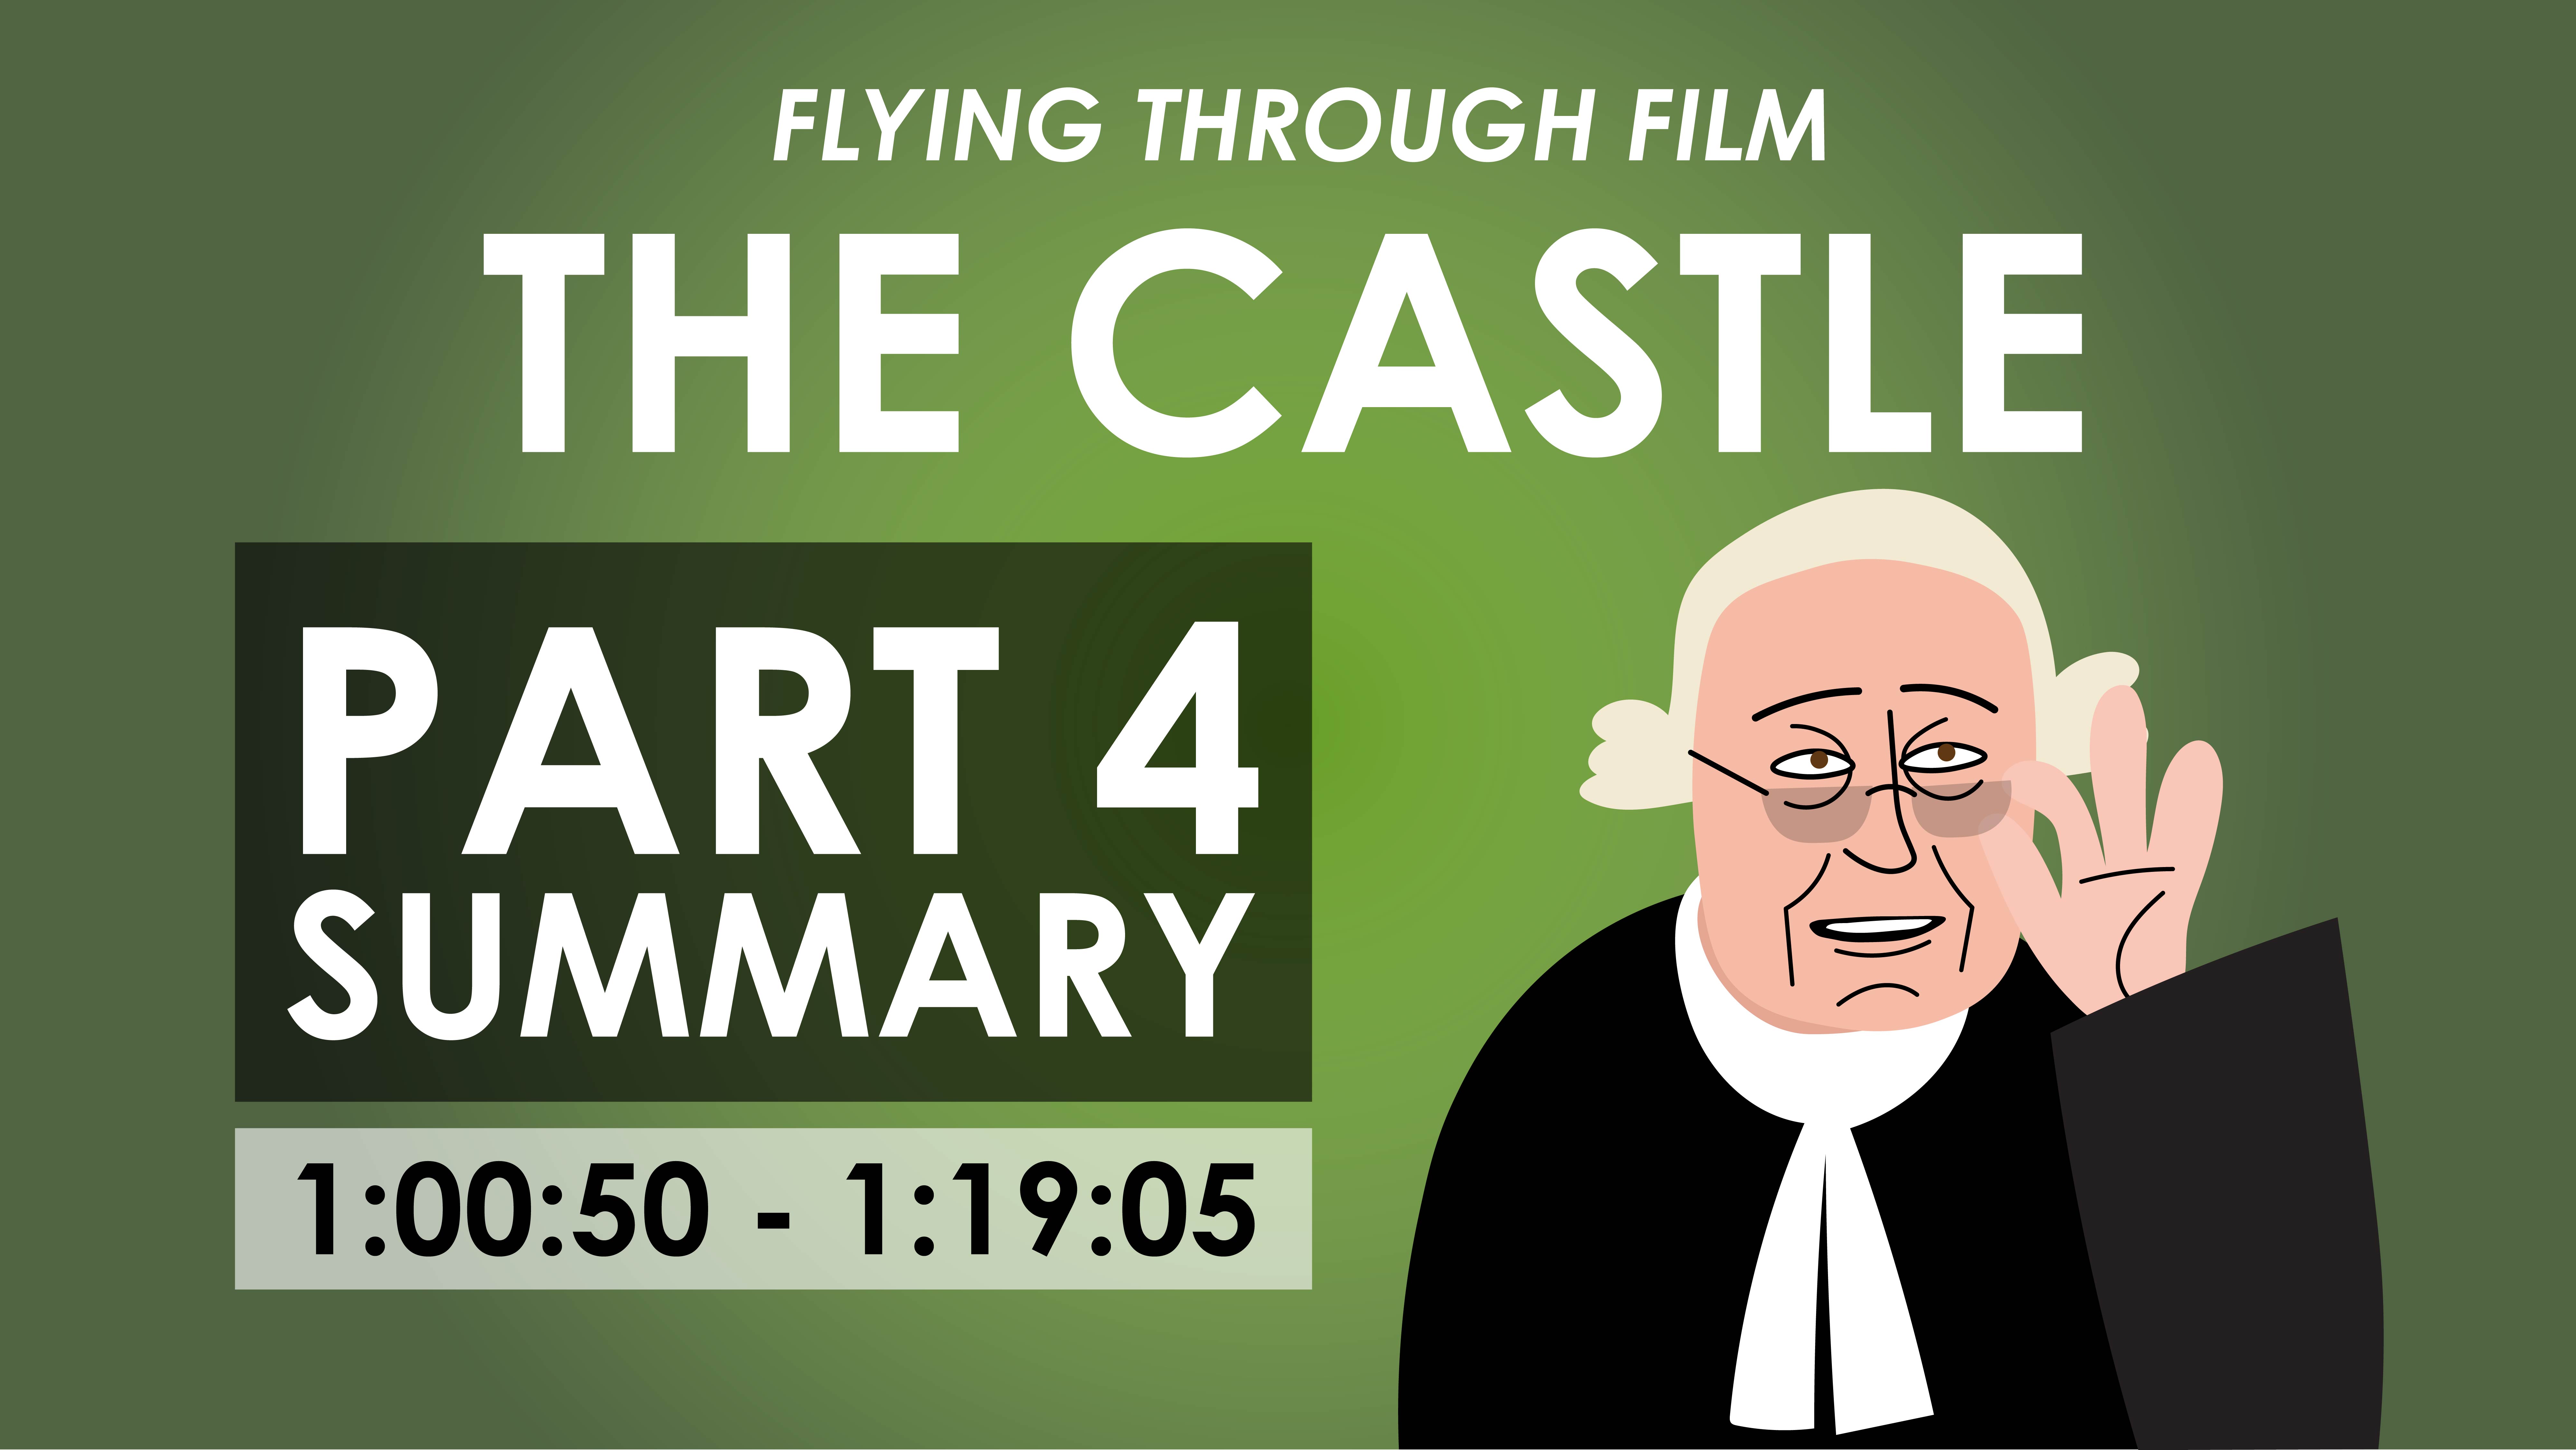 The Castle - Part 4 Summary (0:47:27-1:00:49) - Flying Through Film Series